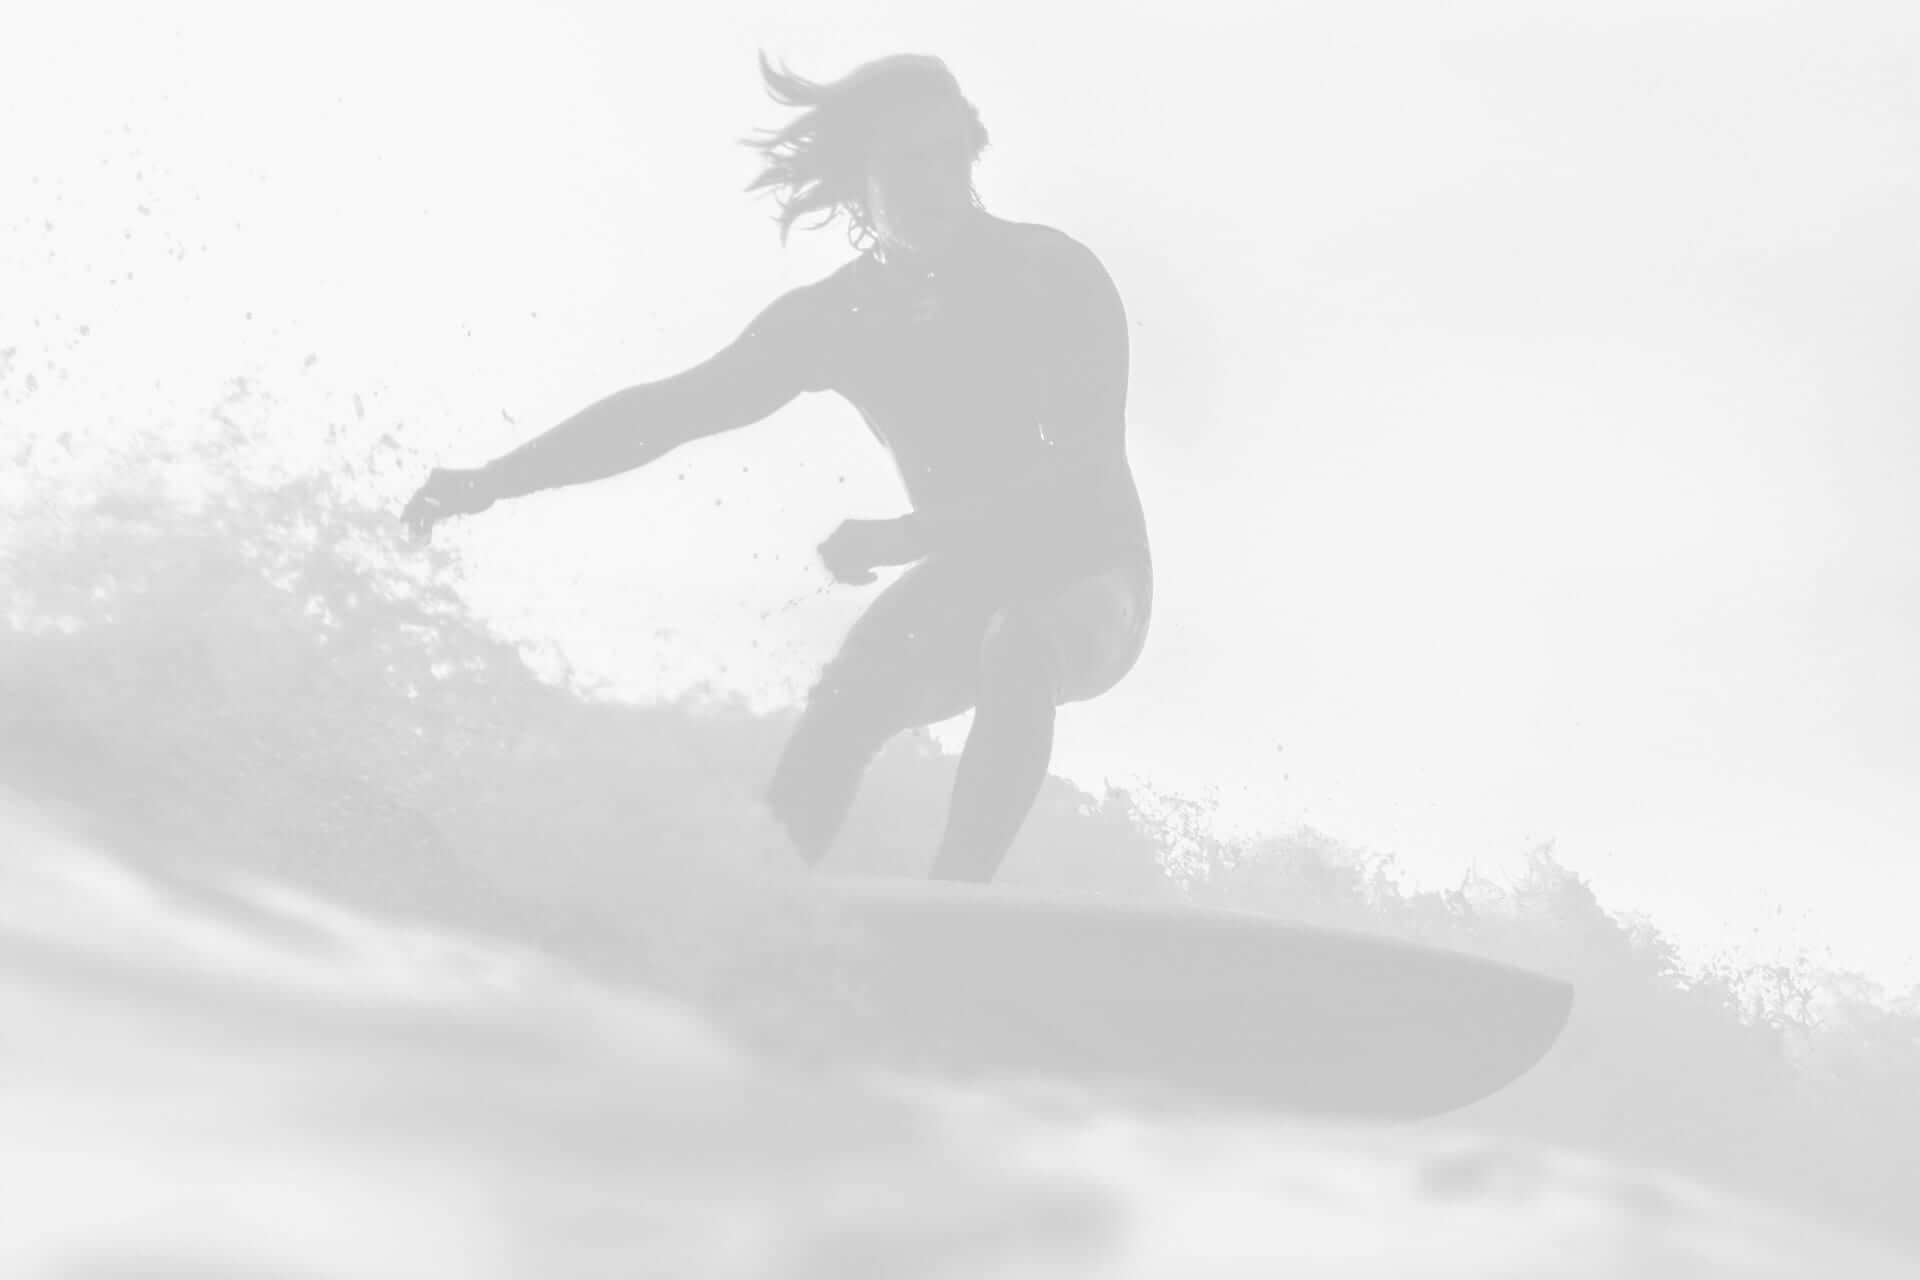 A silhouette of a surfer riding a wave, captured in a high-key, monochrome style.